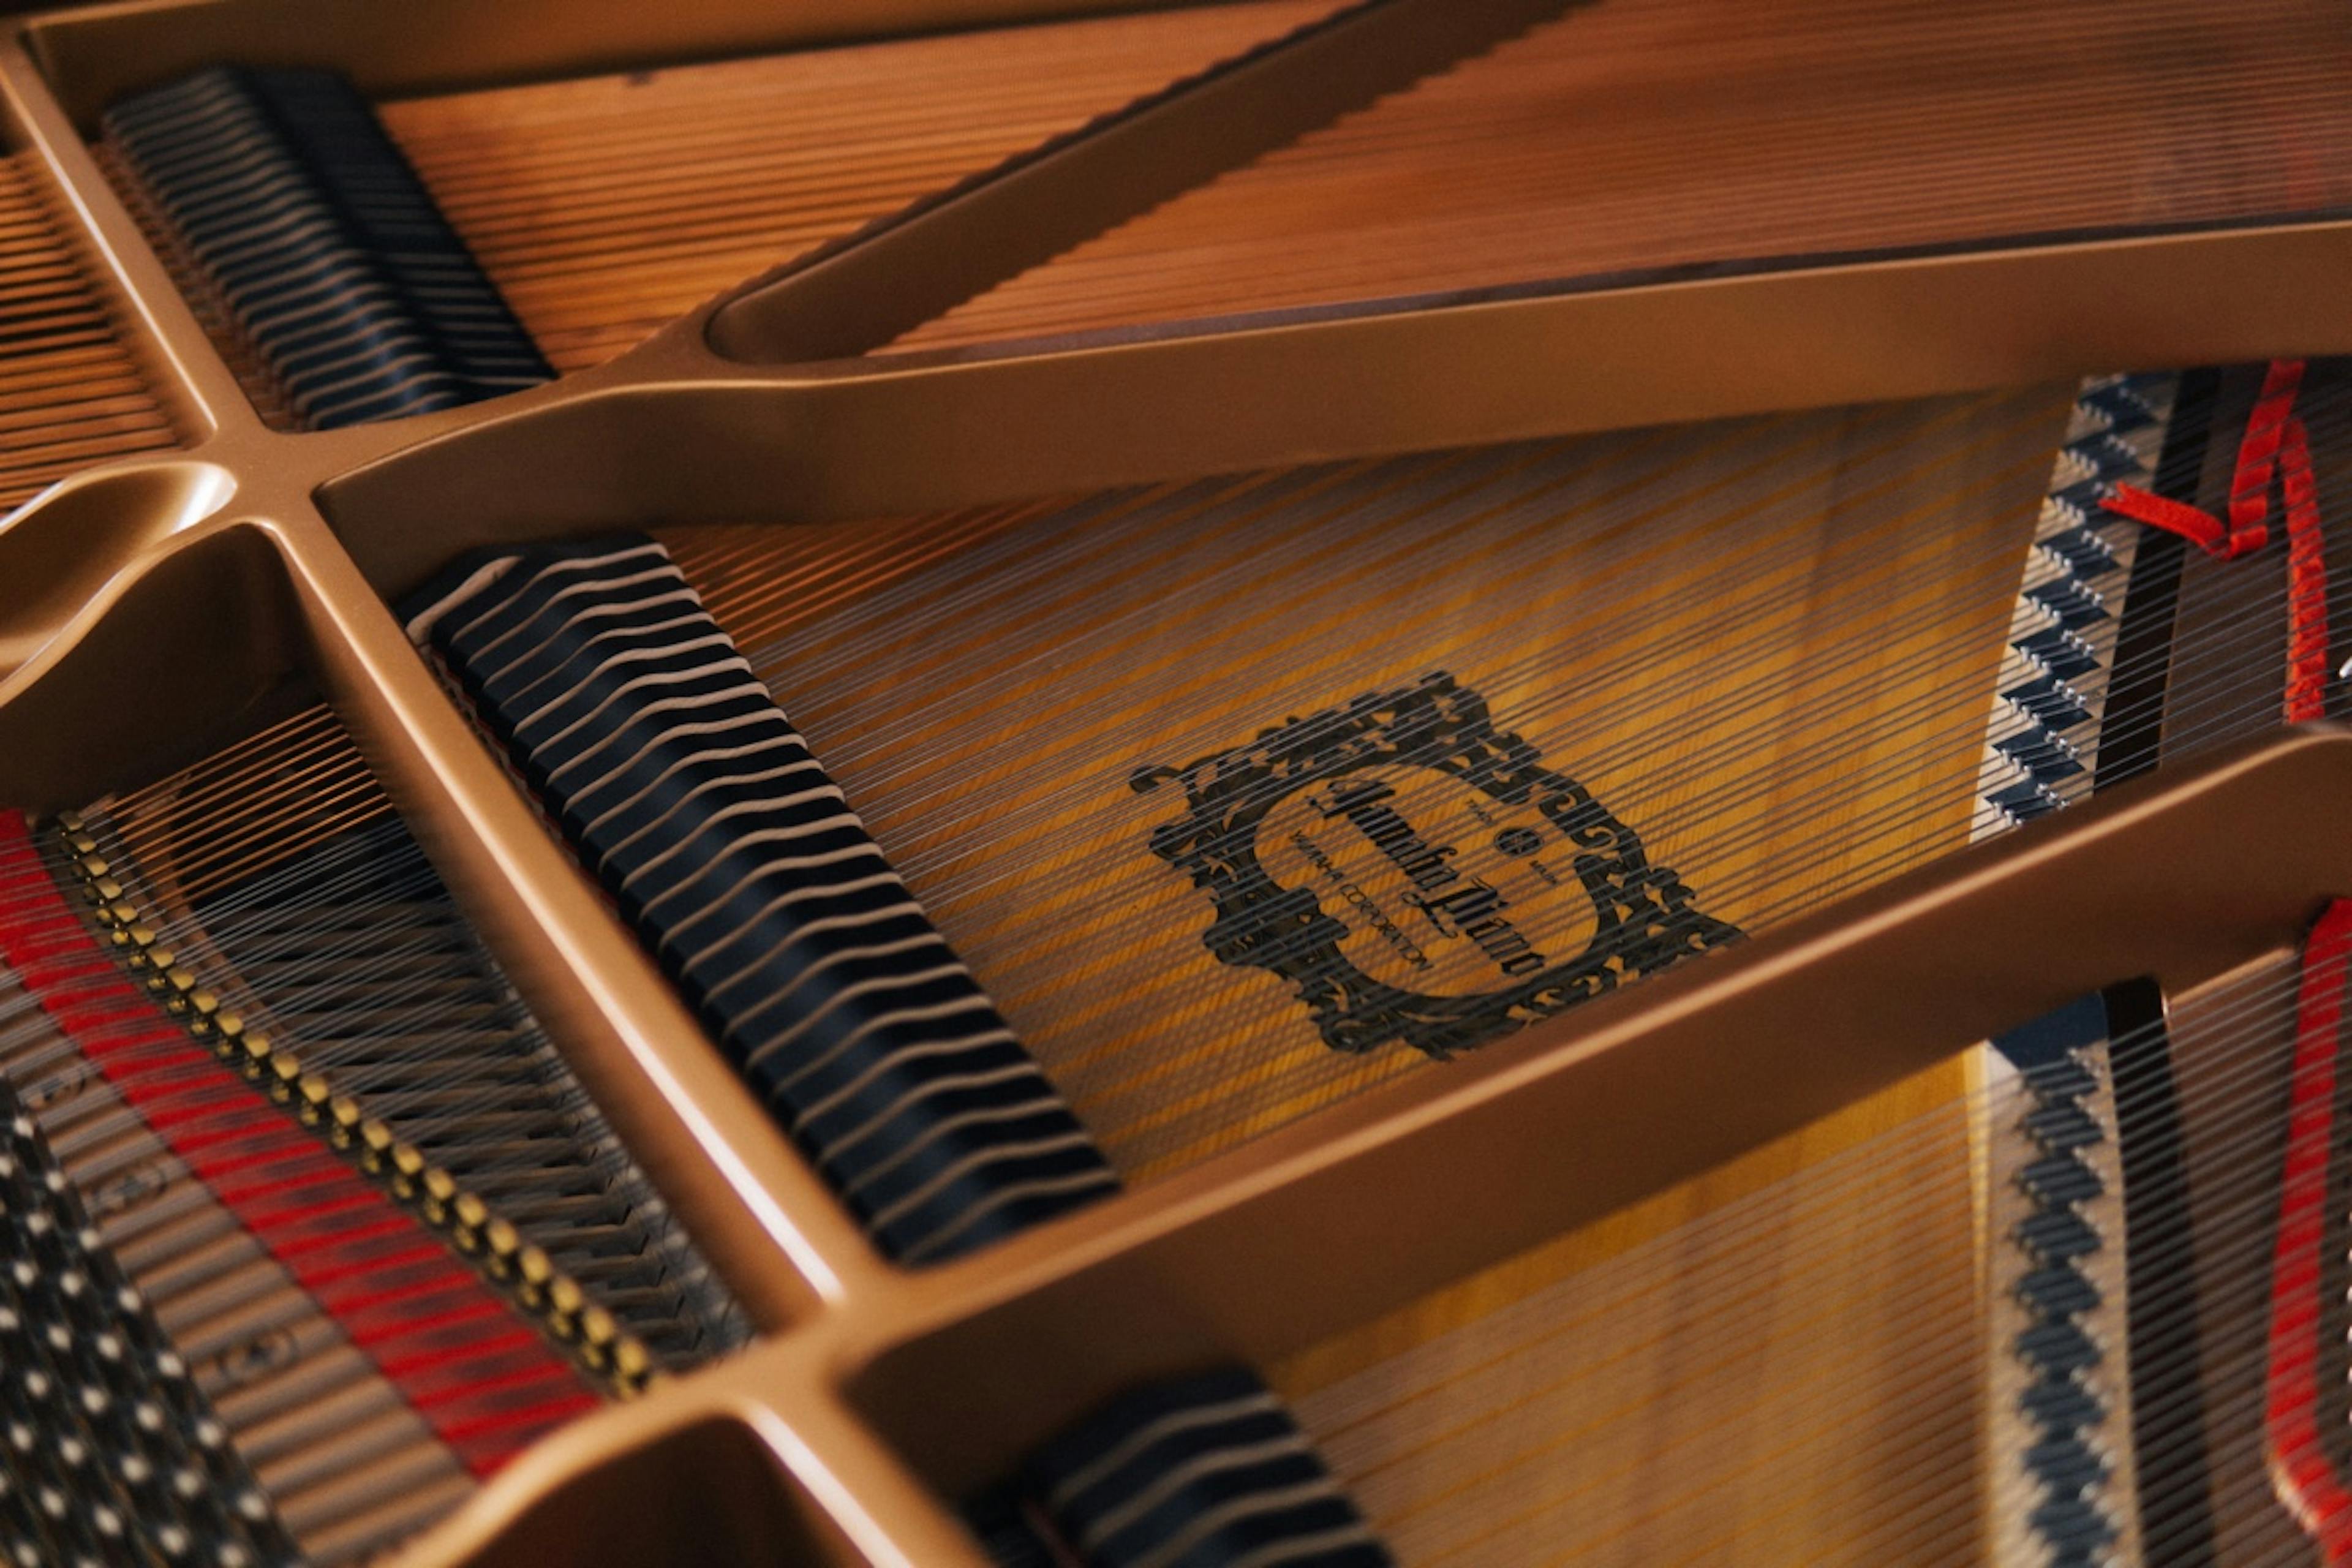 Strings and dampers in a grand piano